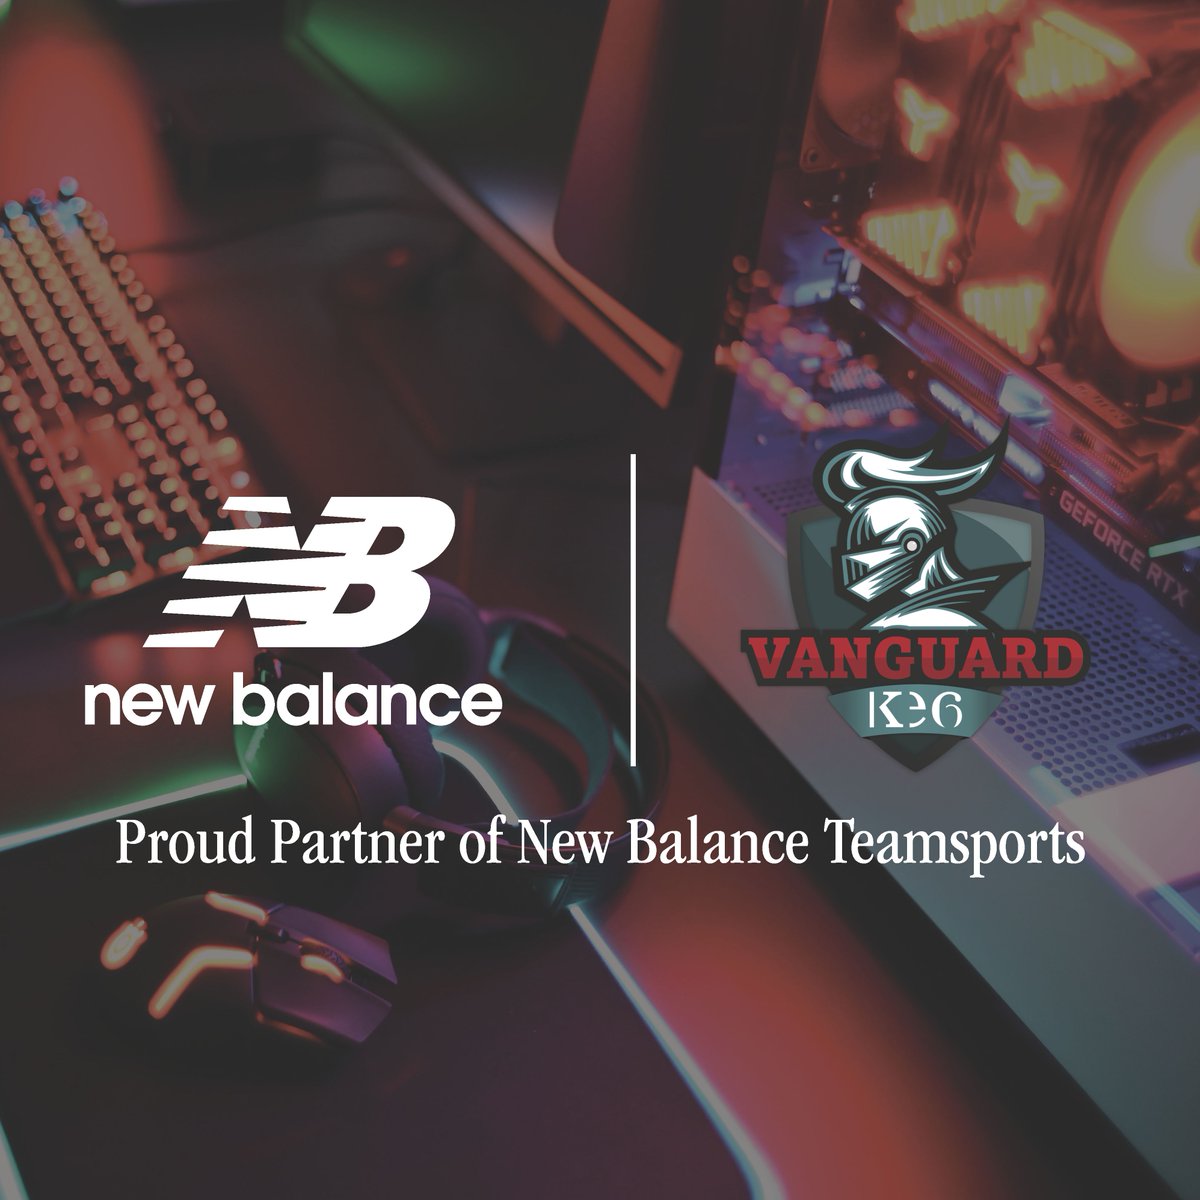 𝕯𝖗𝖎𝖕. 

𝕯𝖗𝖎𝖕.

𝕯𝖗𝖔𝖕.

We're not messing in 23/24. 

KE6 Vanguard - now officially a proud partner of New Balance Teamsports. 

Stay posted for our kit reveal. 🗓️

𝖂𝖊'𝖛𝖊 𝖇𝖊𝖊𝖓 𝖇𝖚𝖘𝖞.

@newbalance @British_Esports